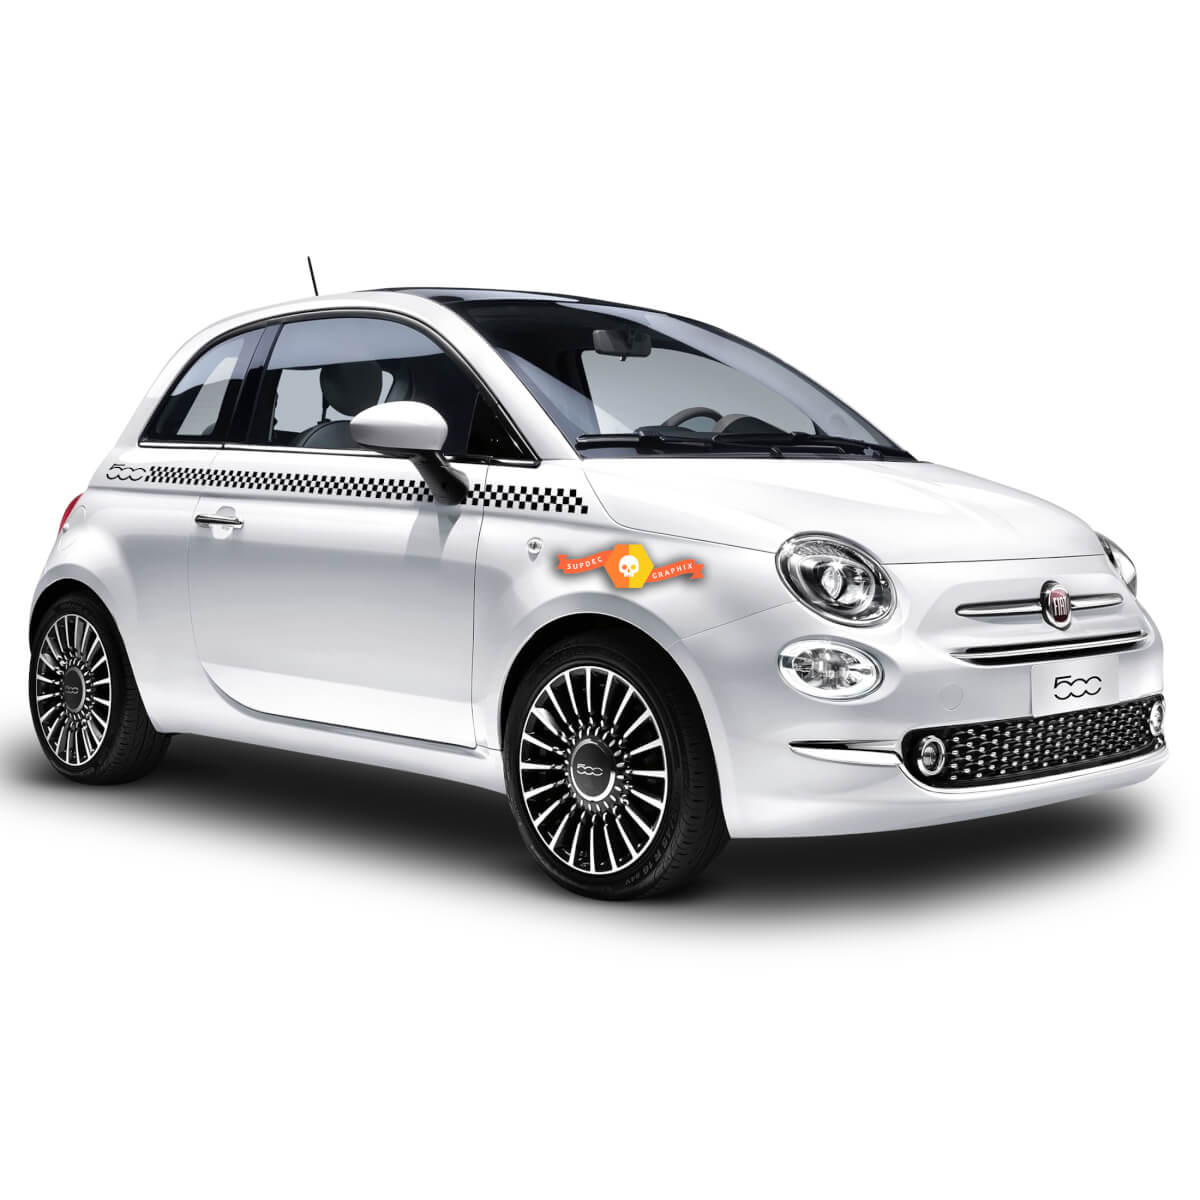 Checkered Side Body Decal Decals Graphics Stripe fits ANY Fiat 500 Abarth